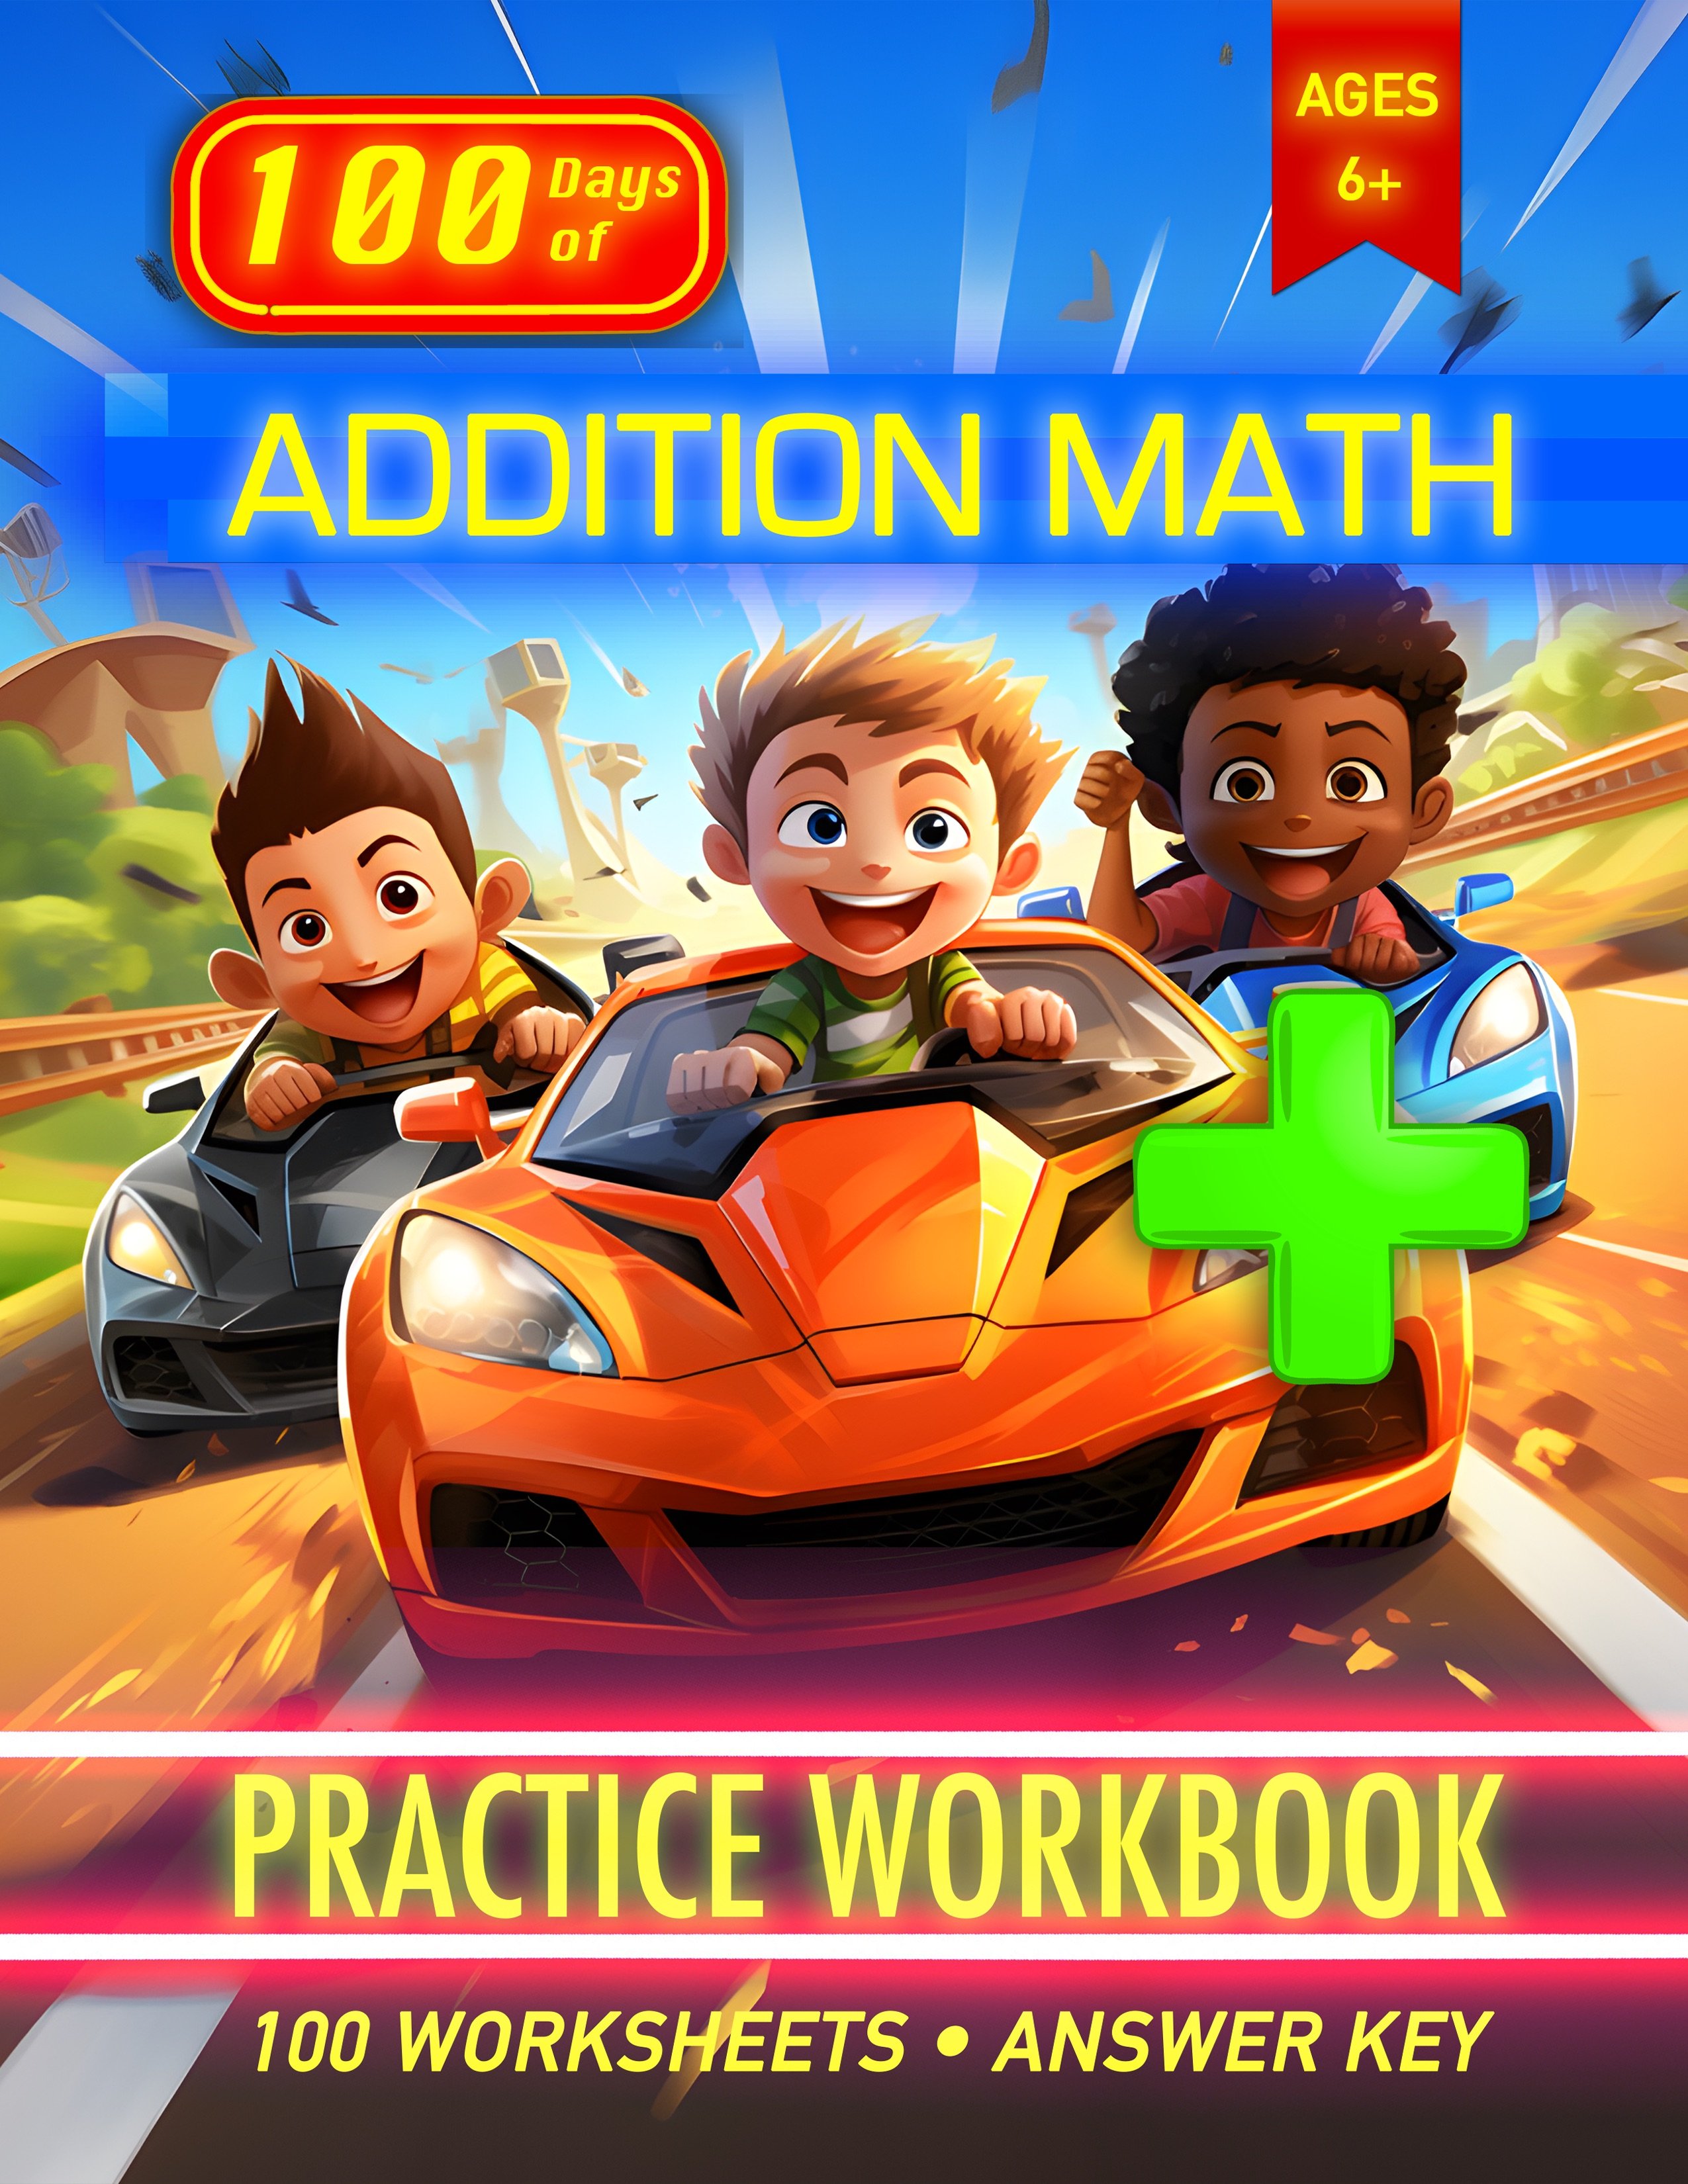 Addition Math Practice Workbook - 100 Worksheets - Answer Key - Ages 6+ Grades 1-5: School and Homeschool Education - Student Number Learning - Supercars and Sports Cars